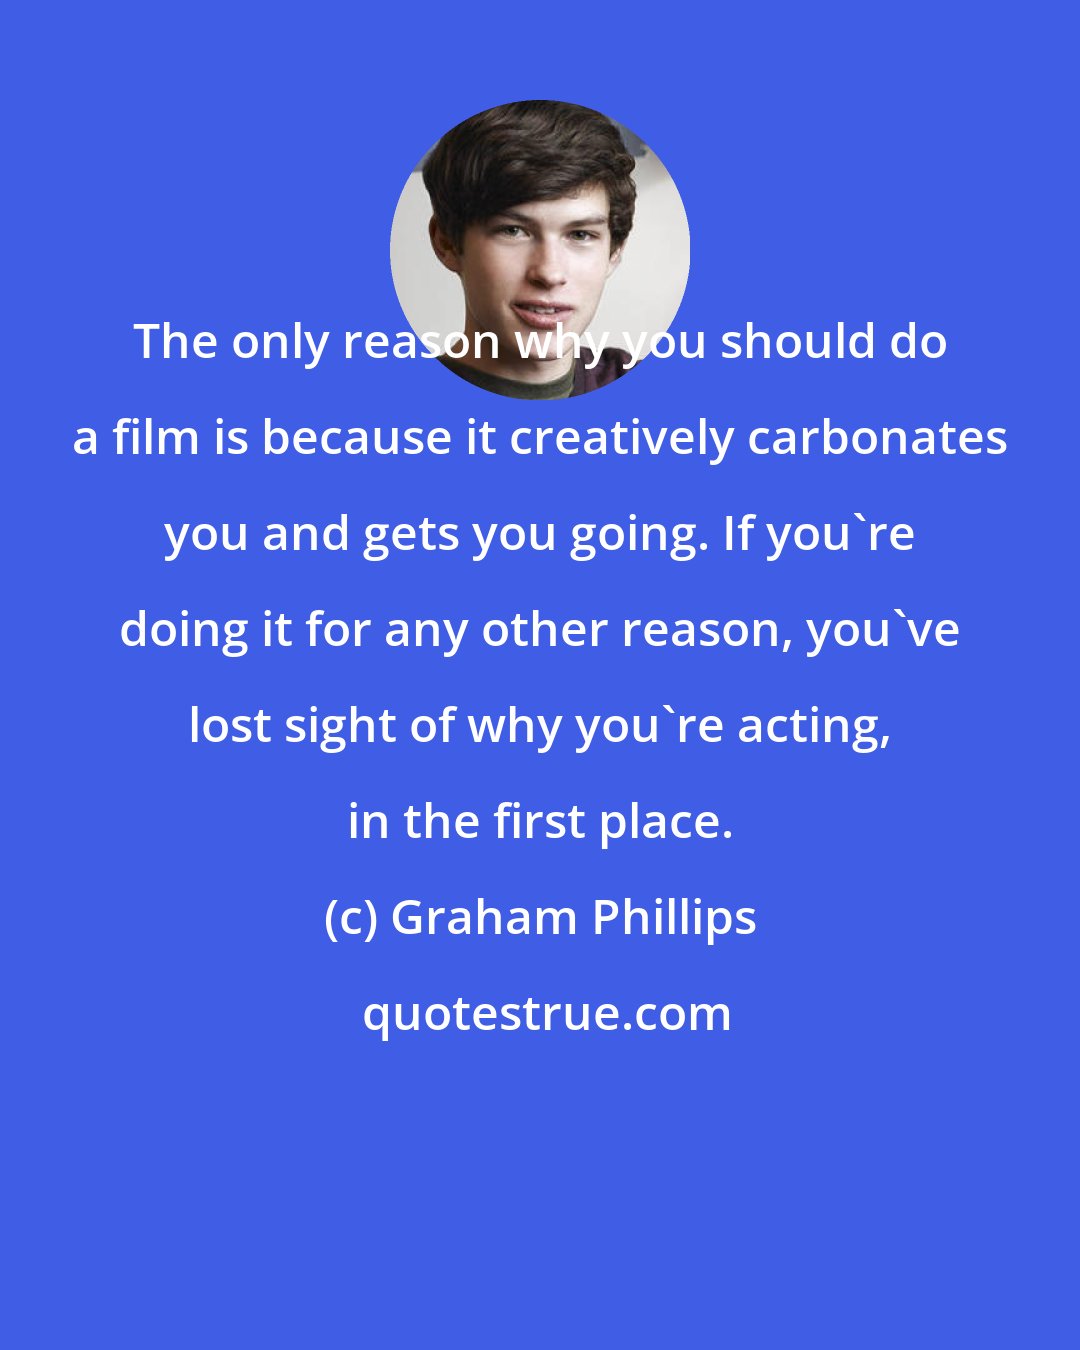 Graham Phillips: The only reason why you should do a film is because it creatively carbonates you and gets you going. If you're doing it for any other reason, you've lost sight of why you're acting, in the first place.